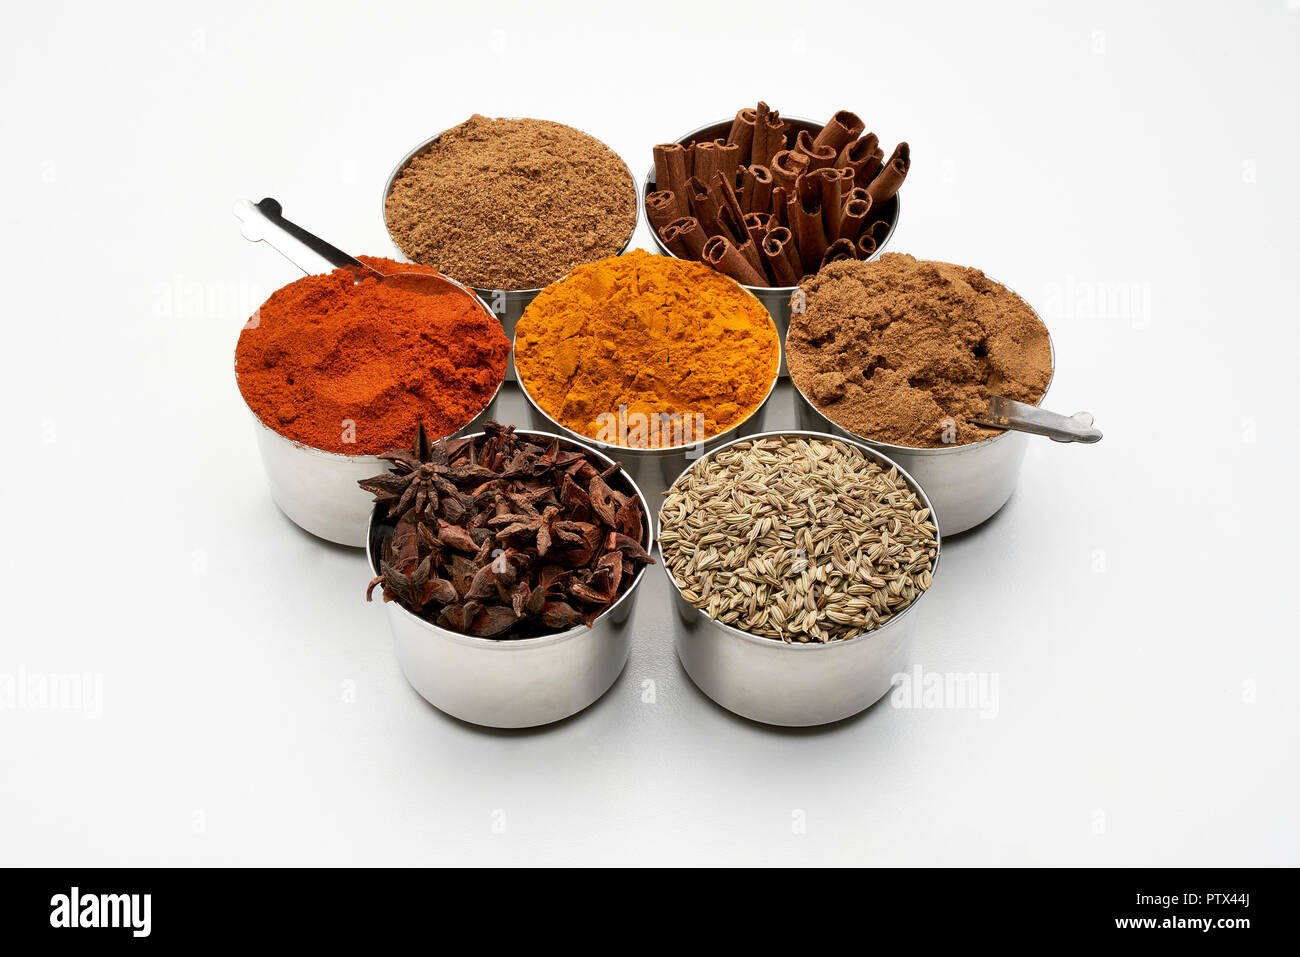 Seven spice tins on a white background including, chili, turmeric, garam masala and cumin powders as well as cassia bark, star anise and fennel seeds. Stock Photo